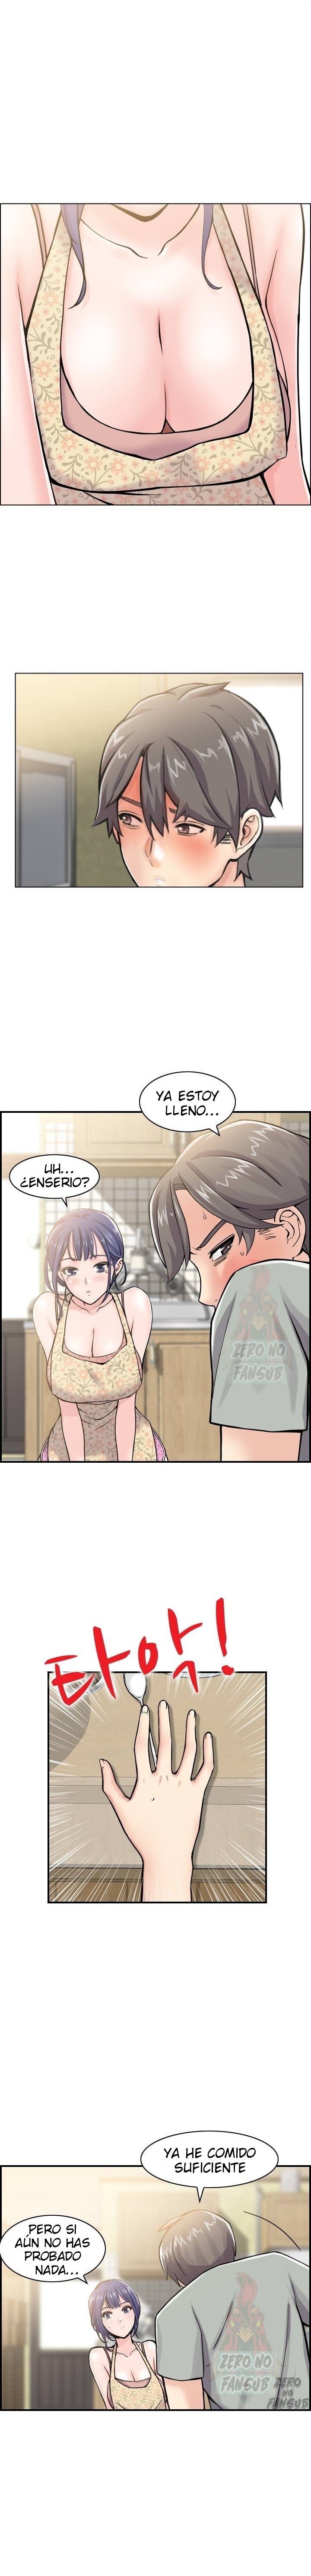 Sister in Law Manhwa Raw - Chapter 3 Page 15